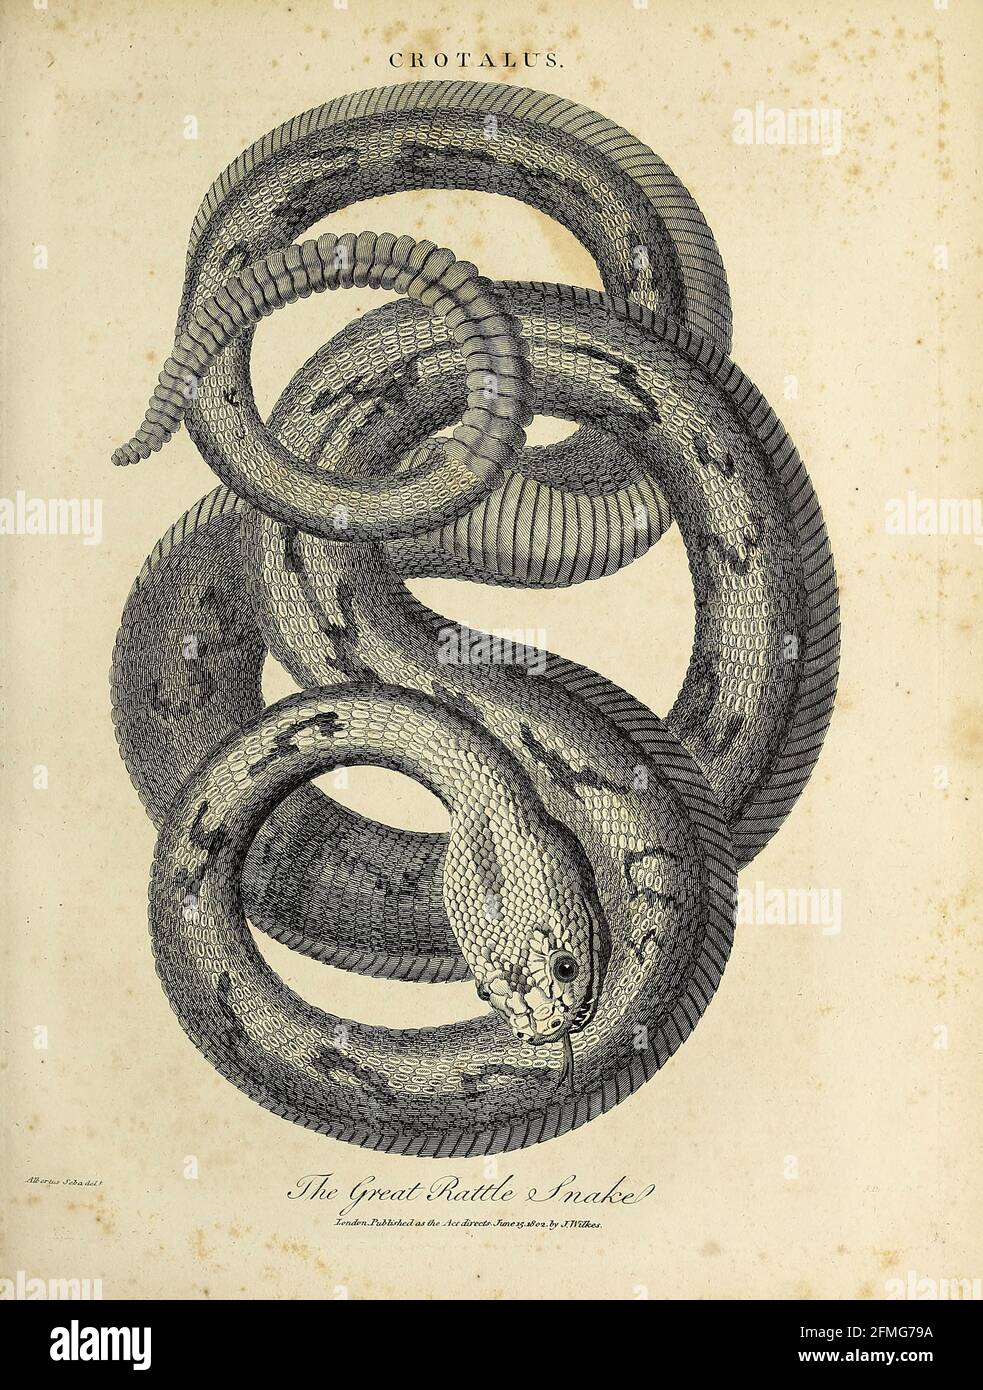 Crotalus The Great Rattle Snake Copperplate engraving From the Encyclopaedia Londinensis or, Universal dictionary of arts, sciences, and literature; Volume V;  Edited by Wilkes, John. Published in London in 1810 Stock Photo